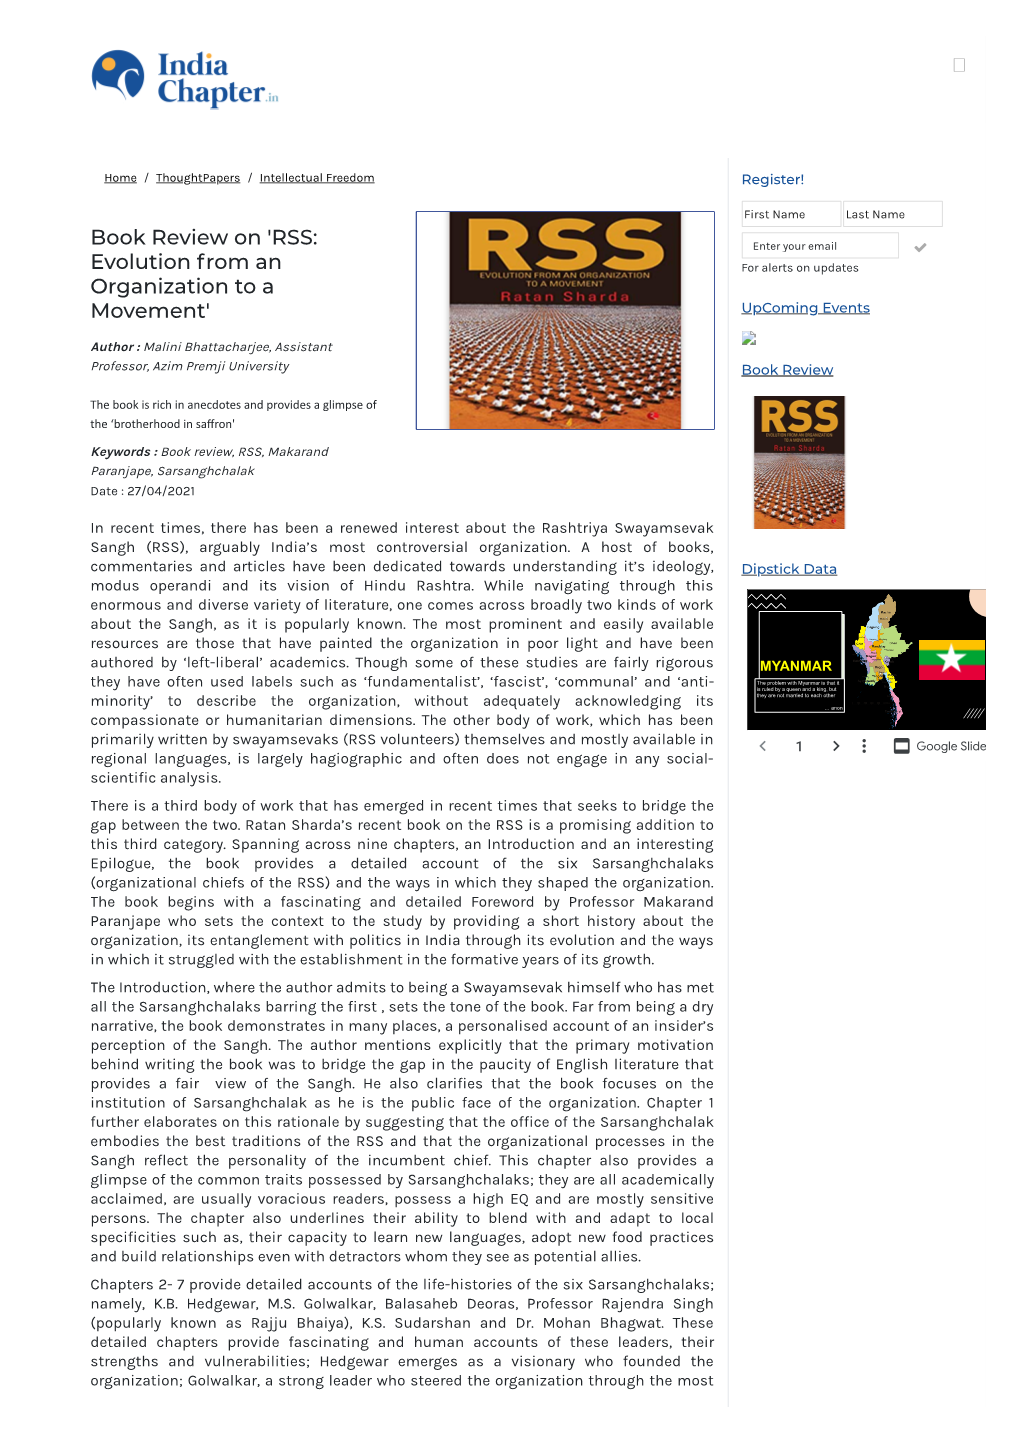 Book Review on 'RSS: Evolution from an Organization to a Movement'